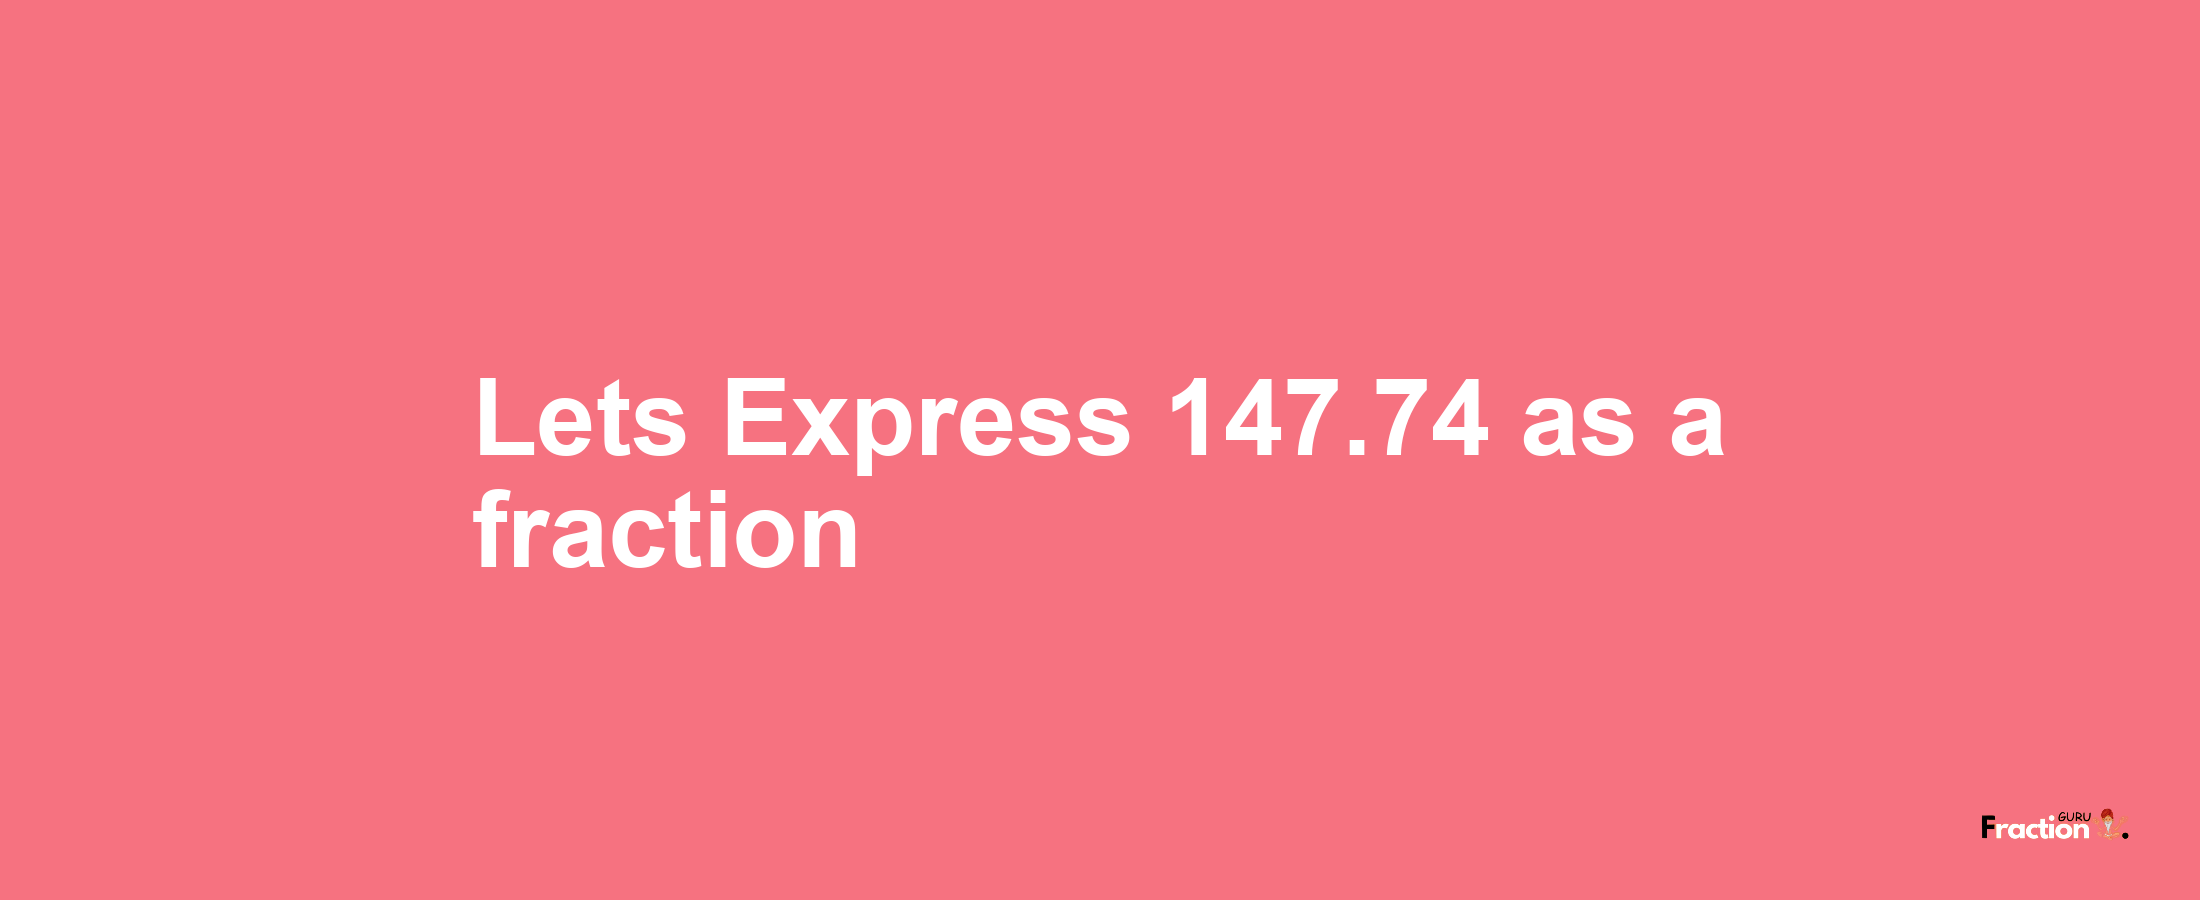 Lets Express 147.74 as afraction